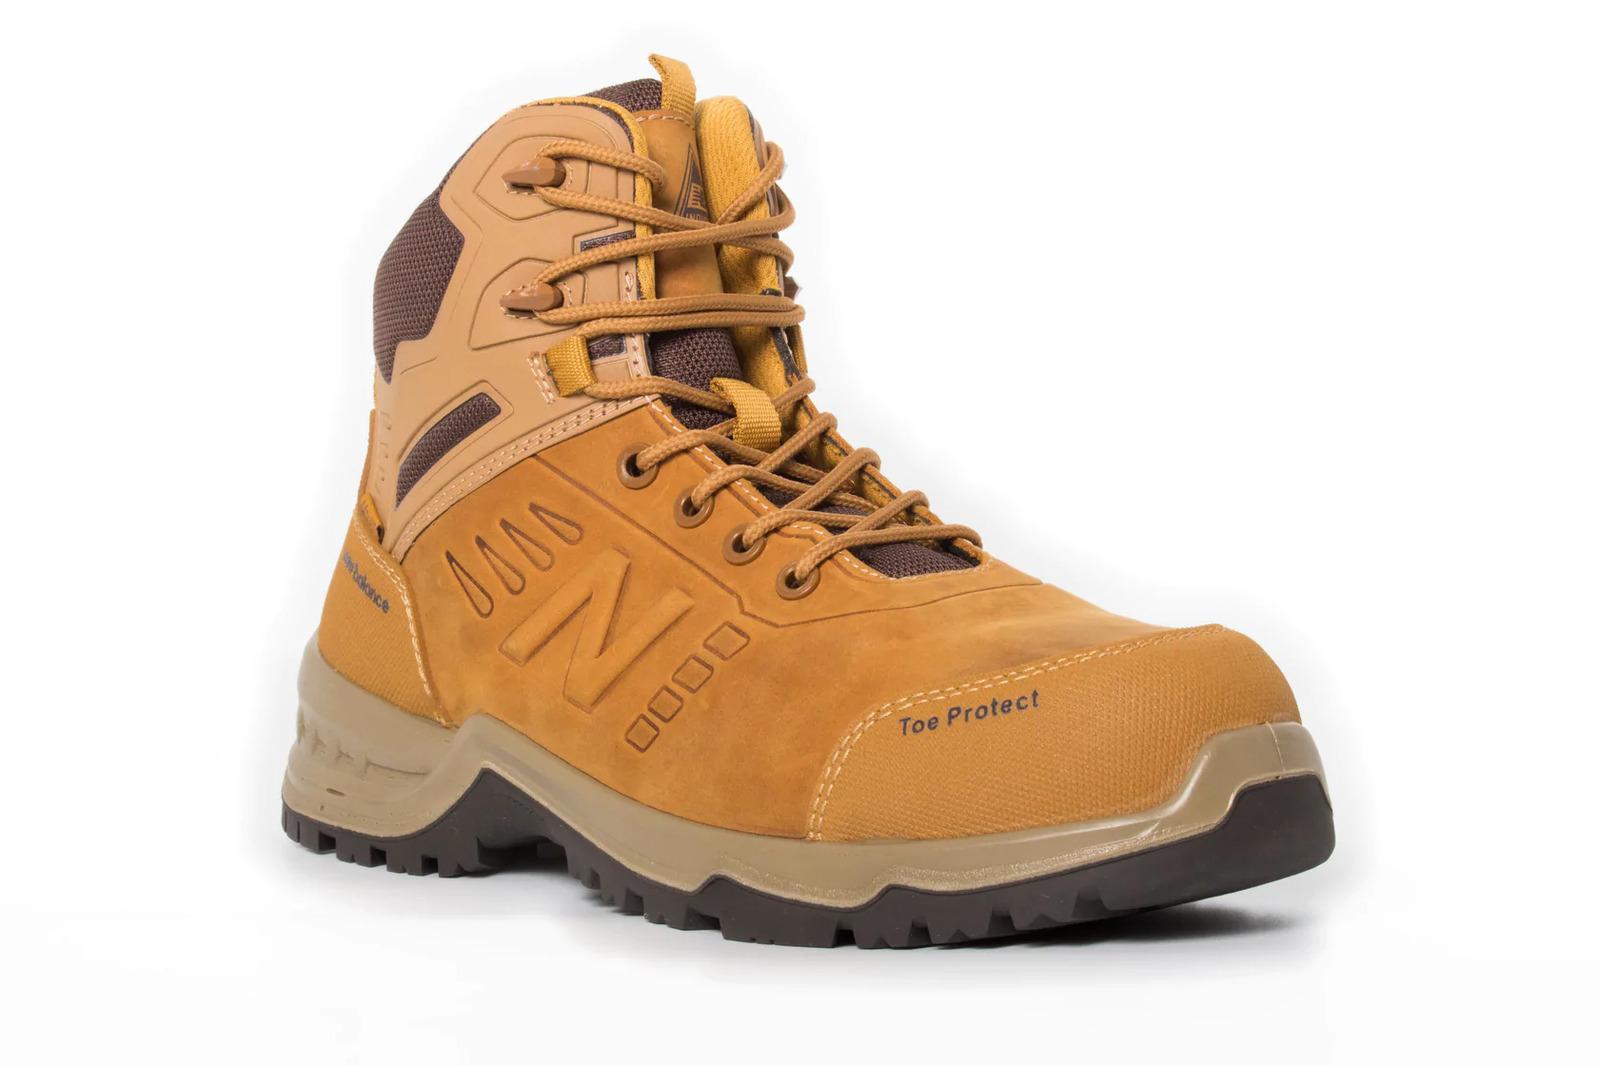 New Balance Mens Contour Steel Toe Cap Safety Work Boots with Zip - Wheat - US 10.5 Width:2E